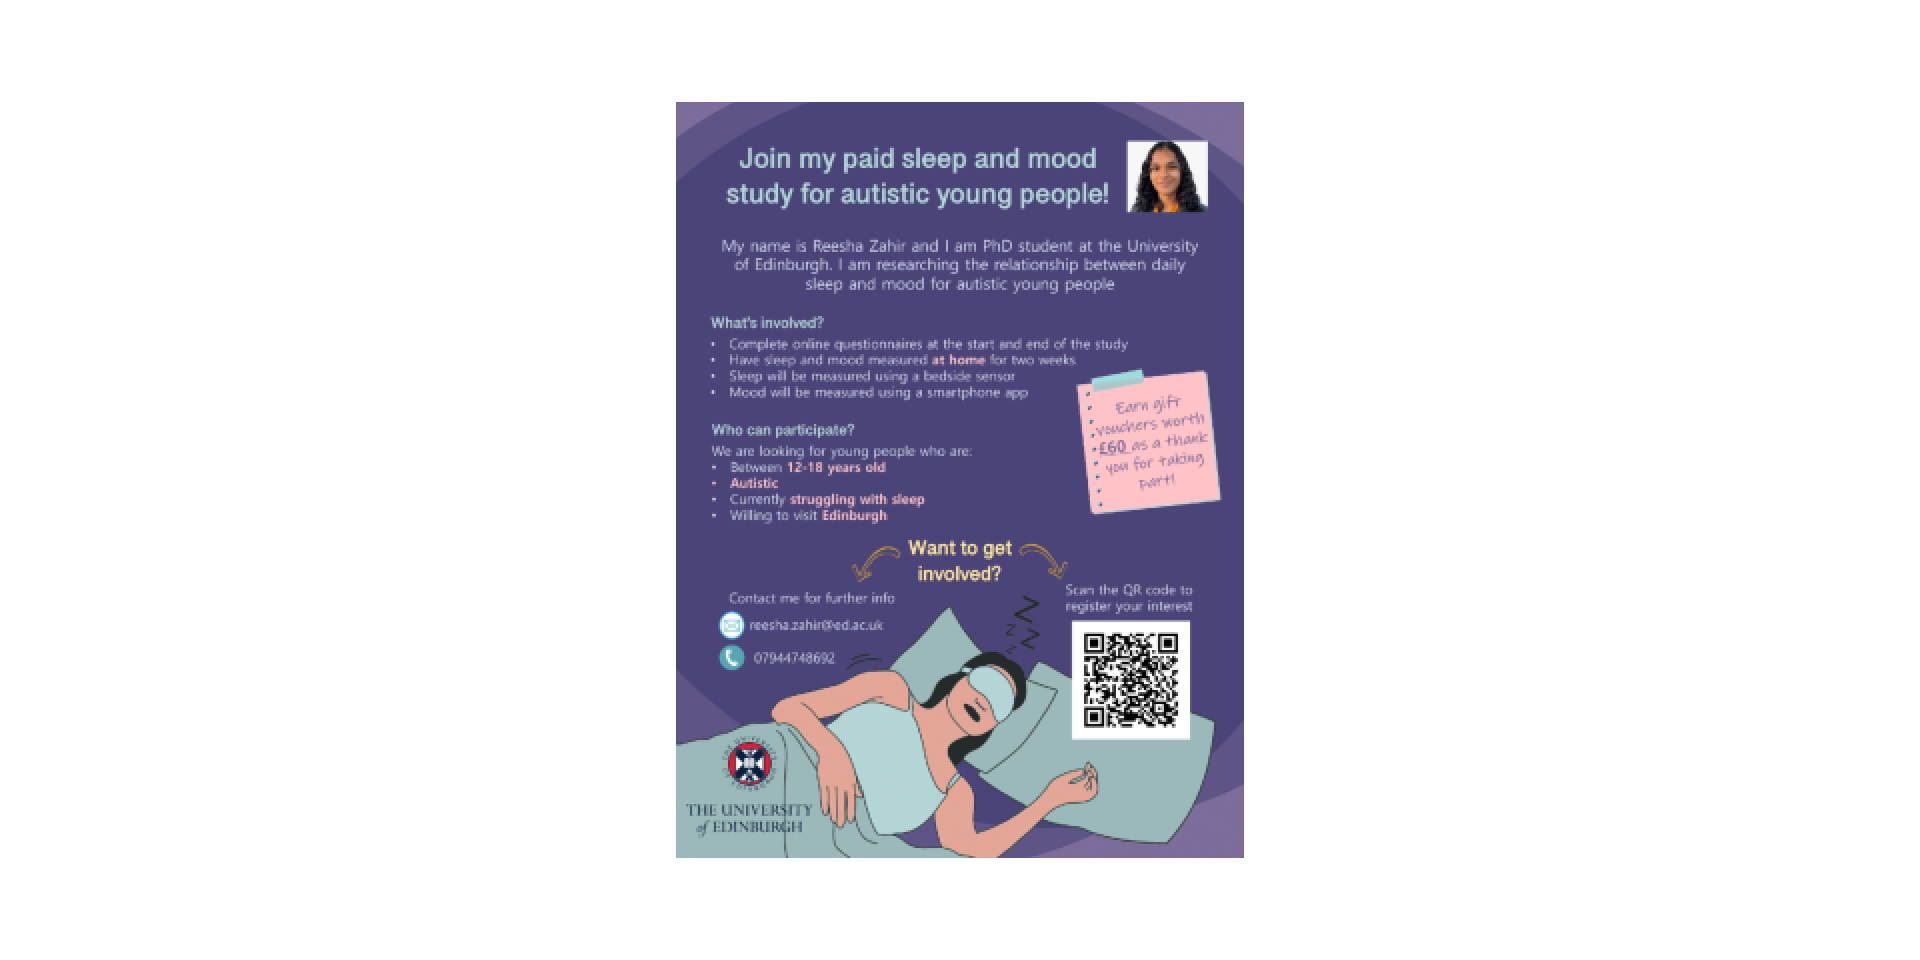 Poster for sleep and mood study with image of sleeping person and photo of researcher